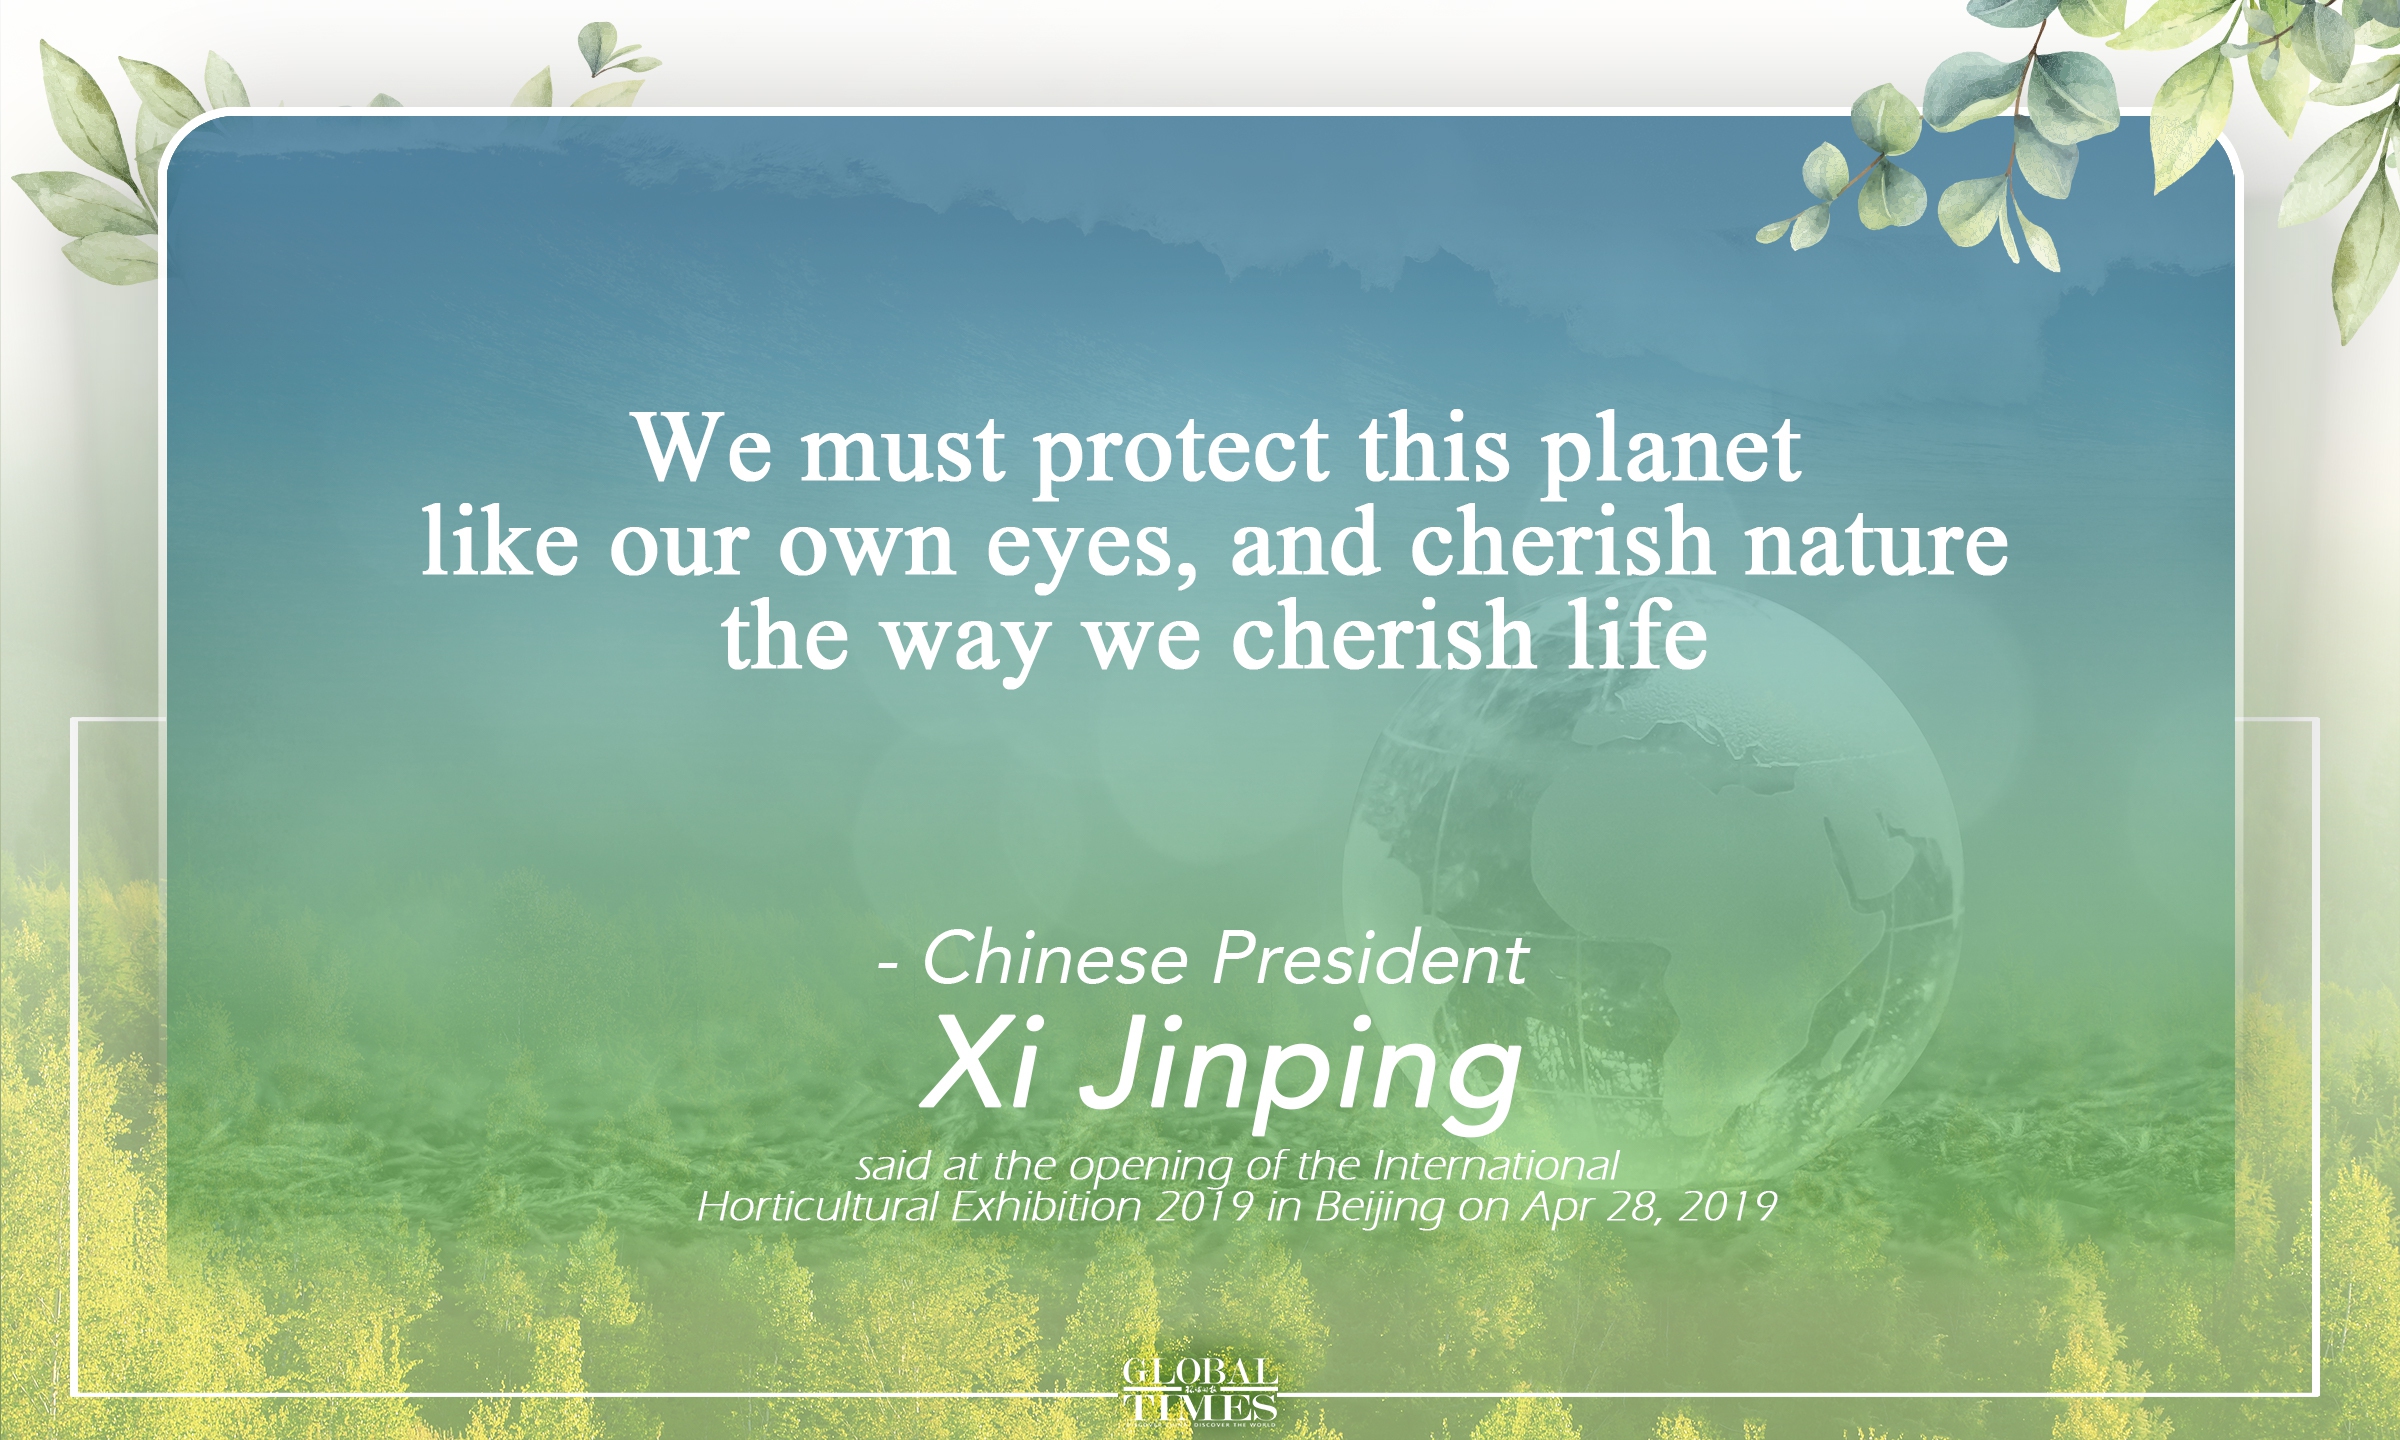 Quotes from Chinese President Xi Jinping on environmental protection